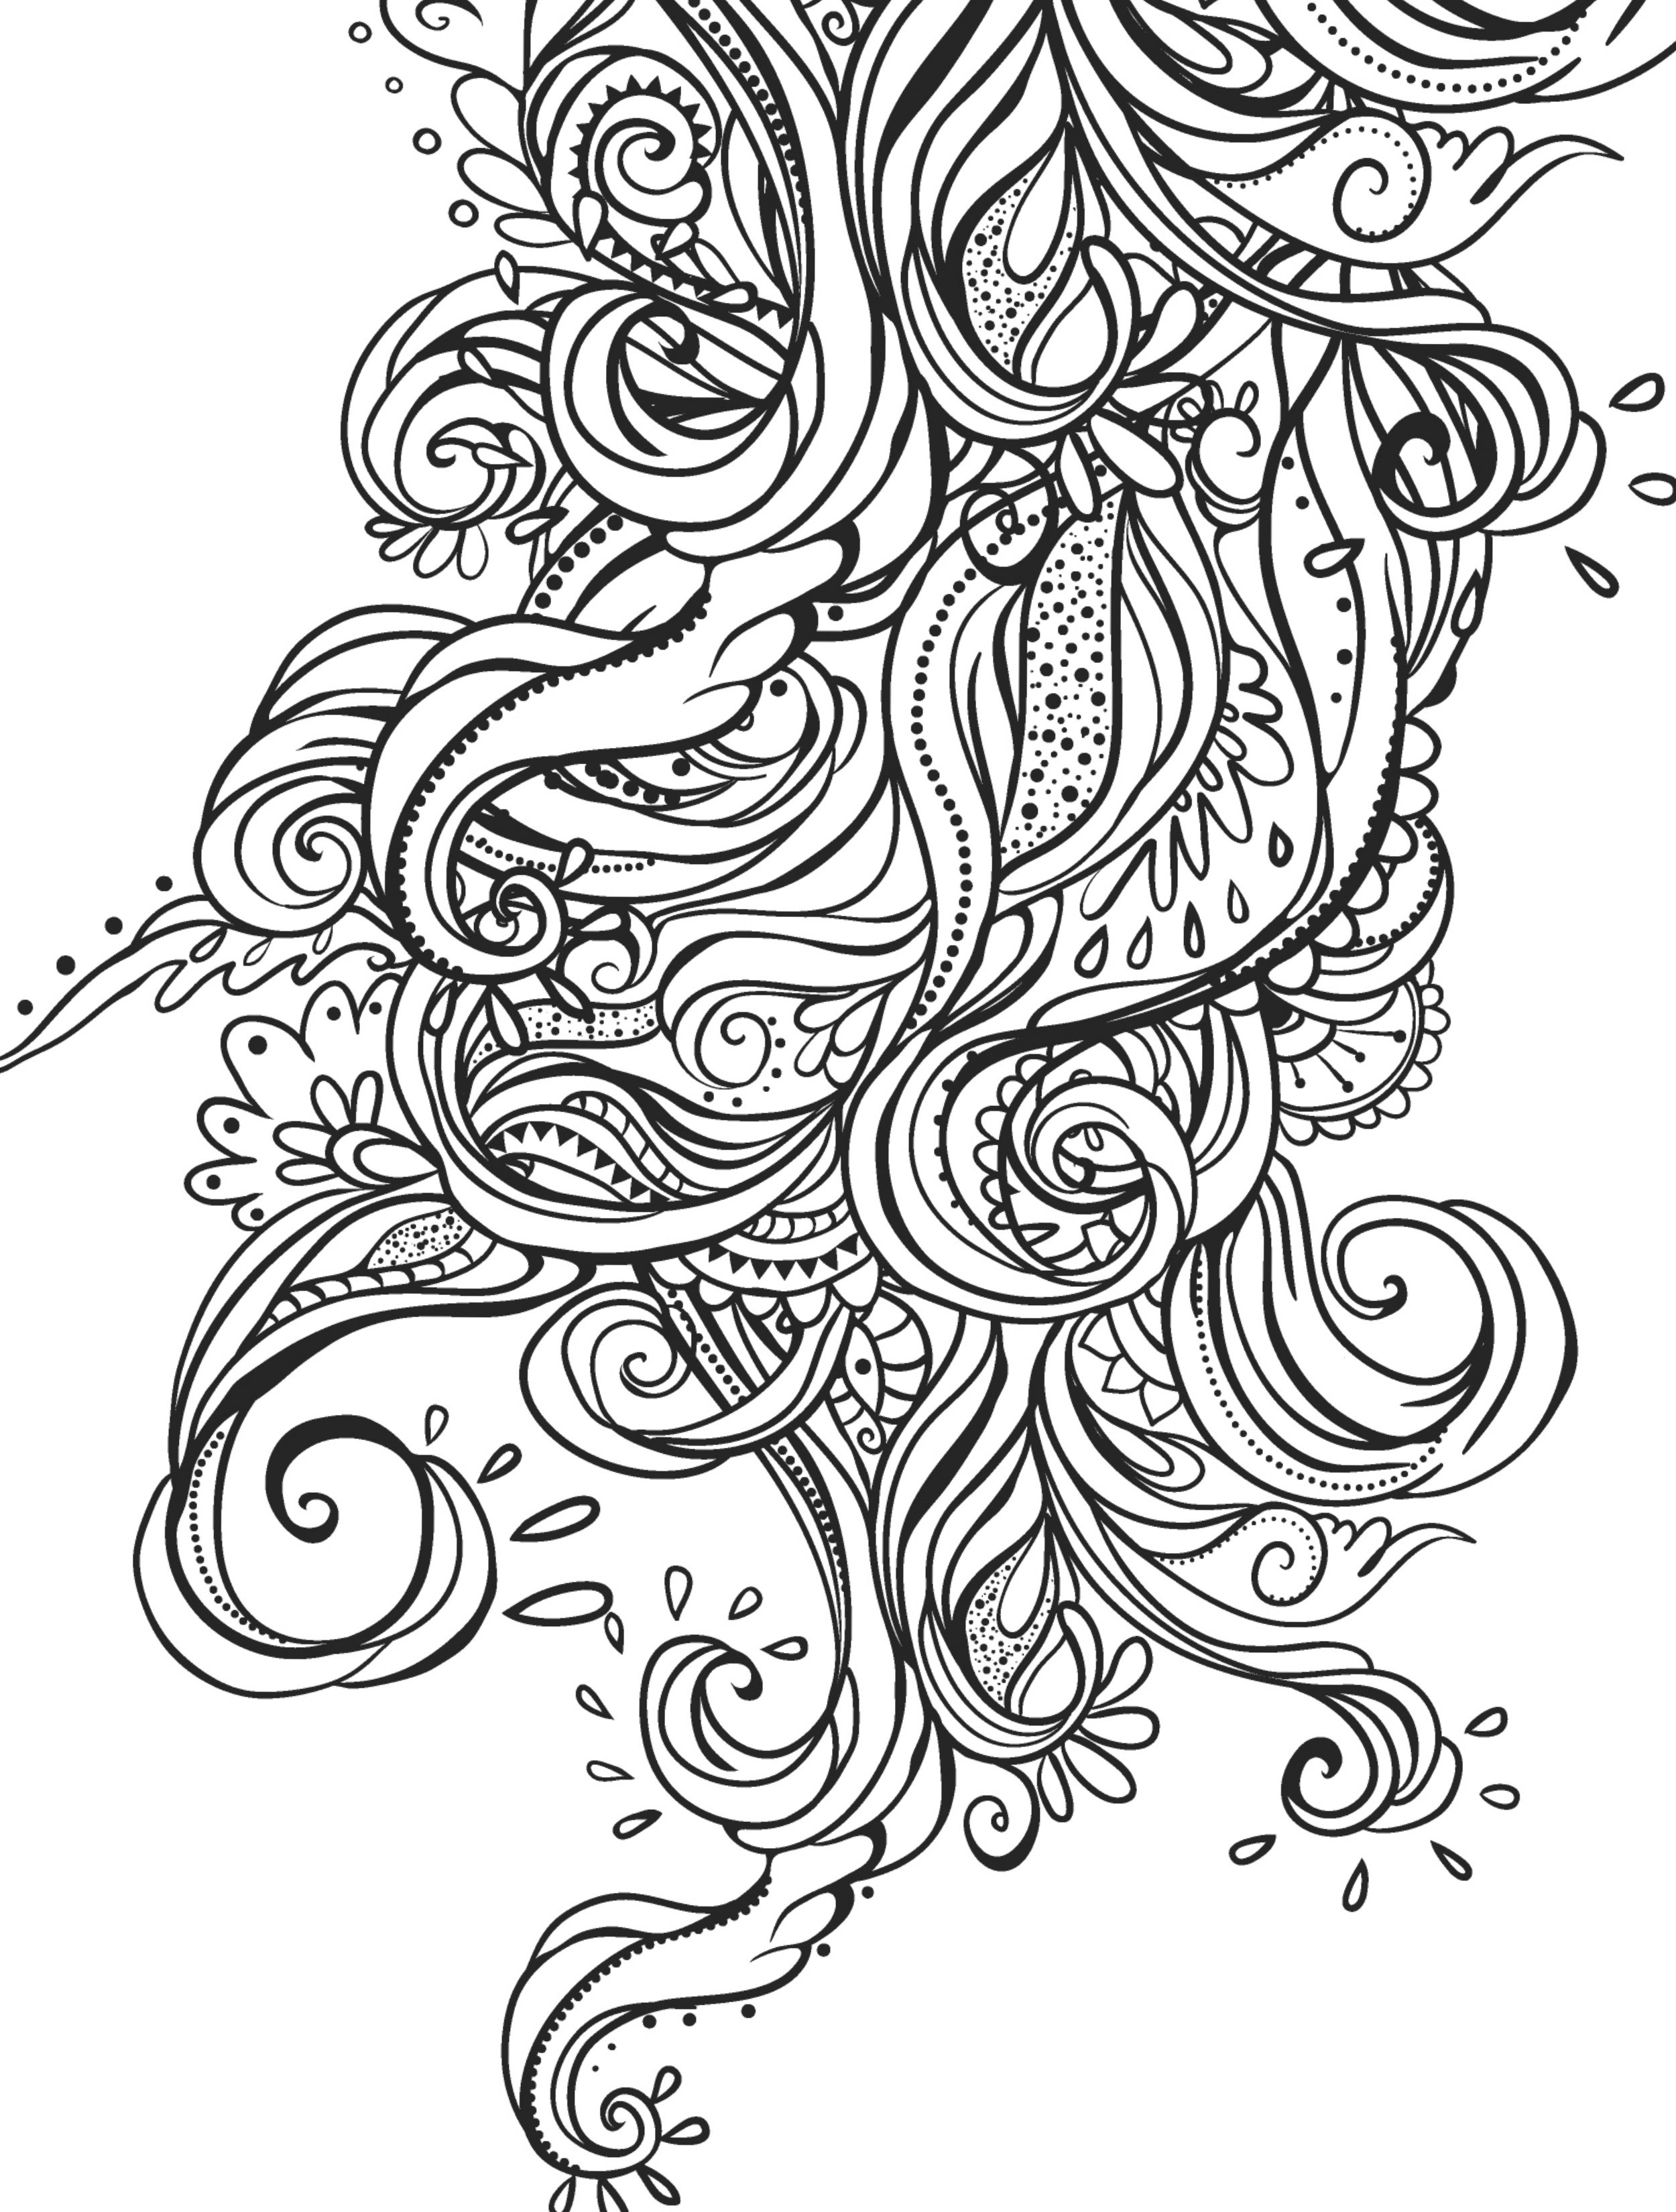 Aztec Pattern Coloring Pages at GetColorings.com | Free ...